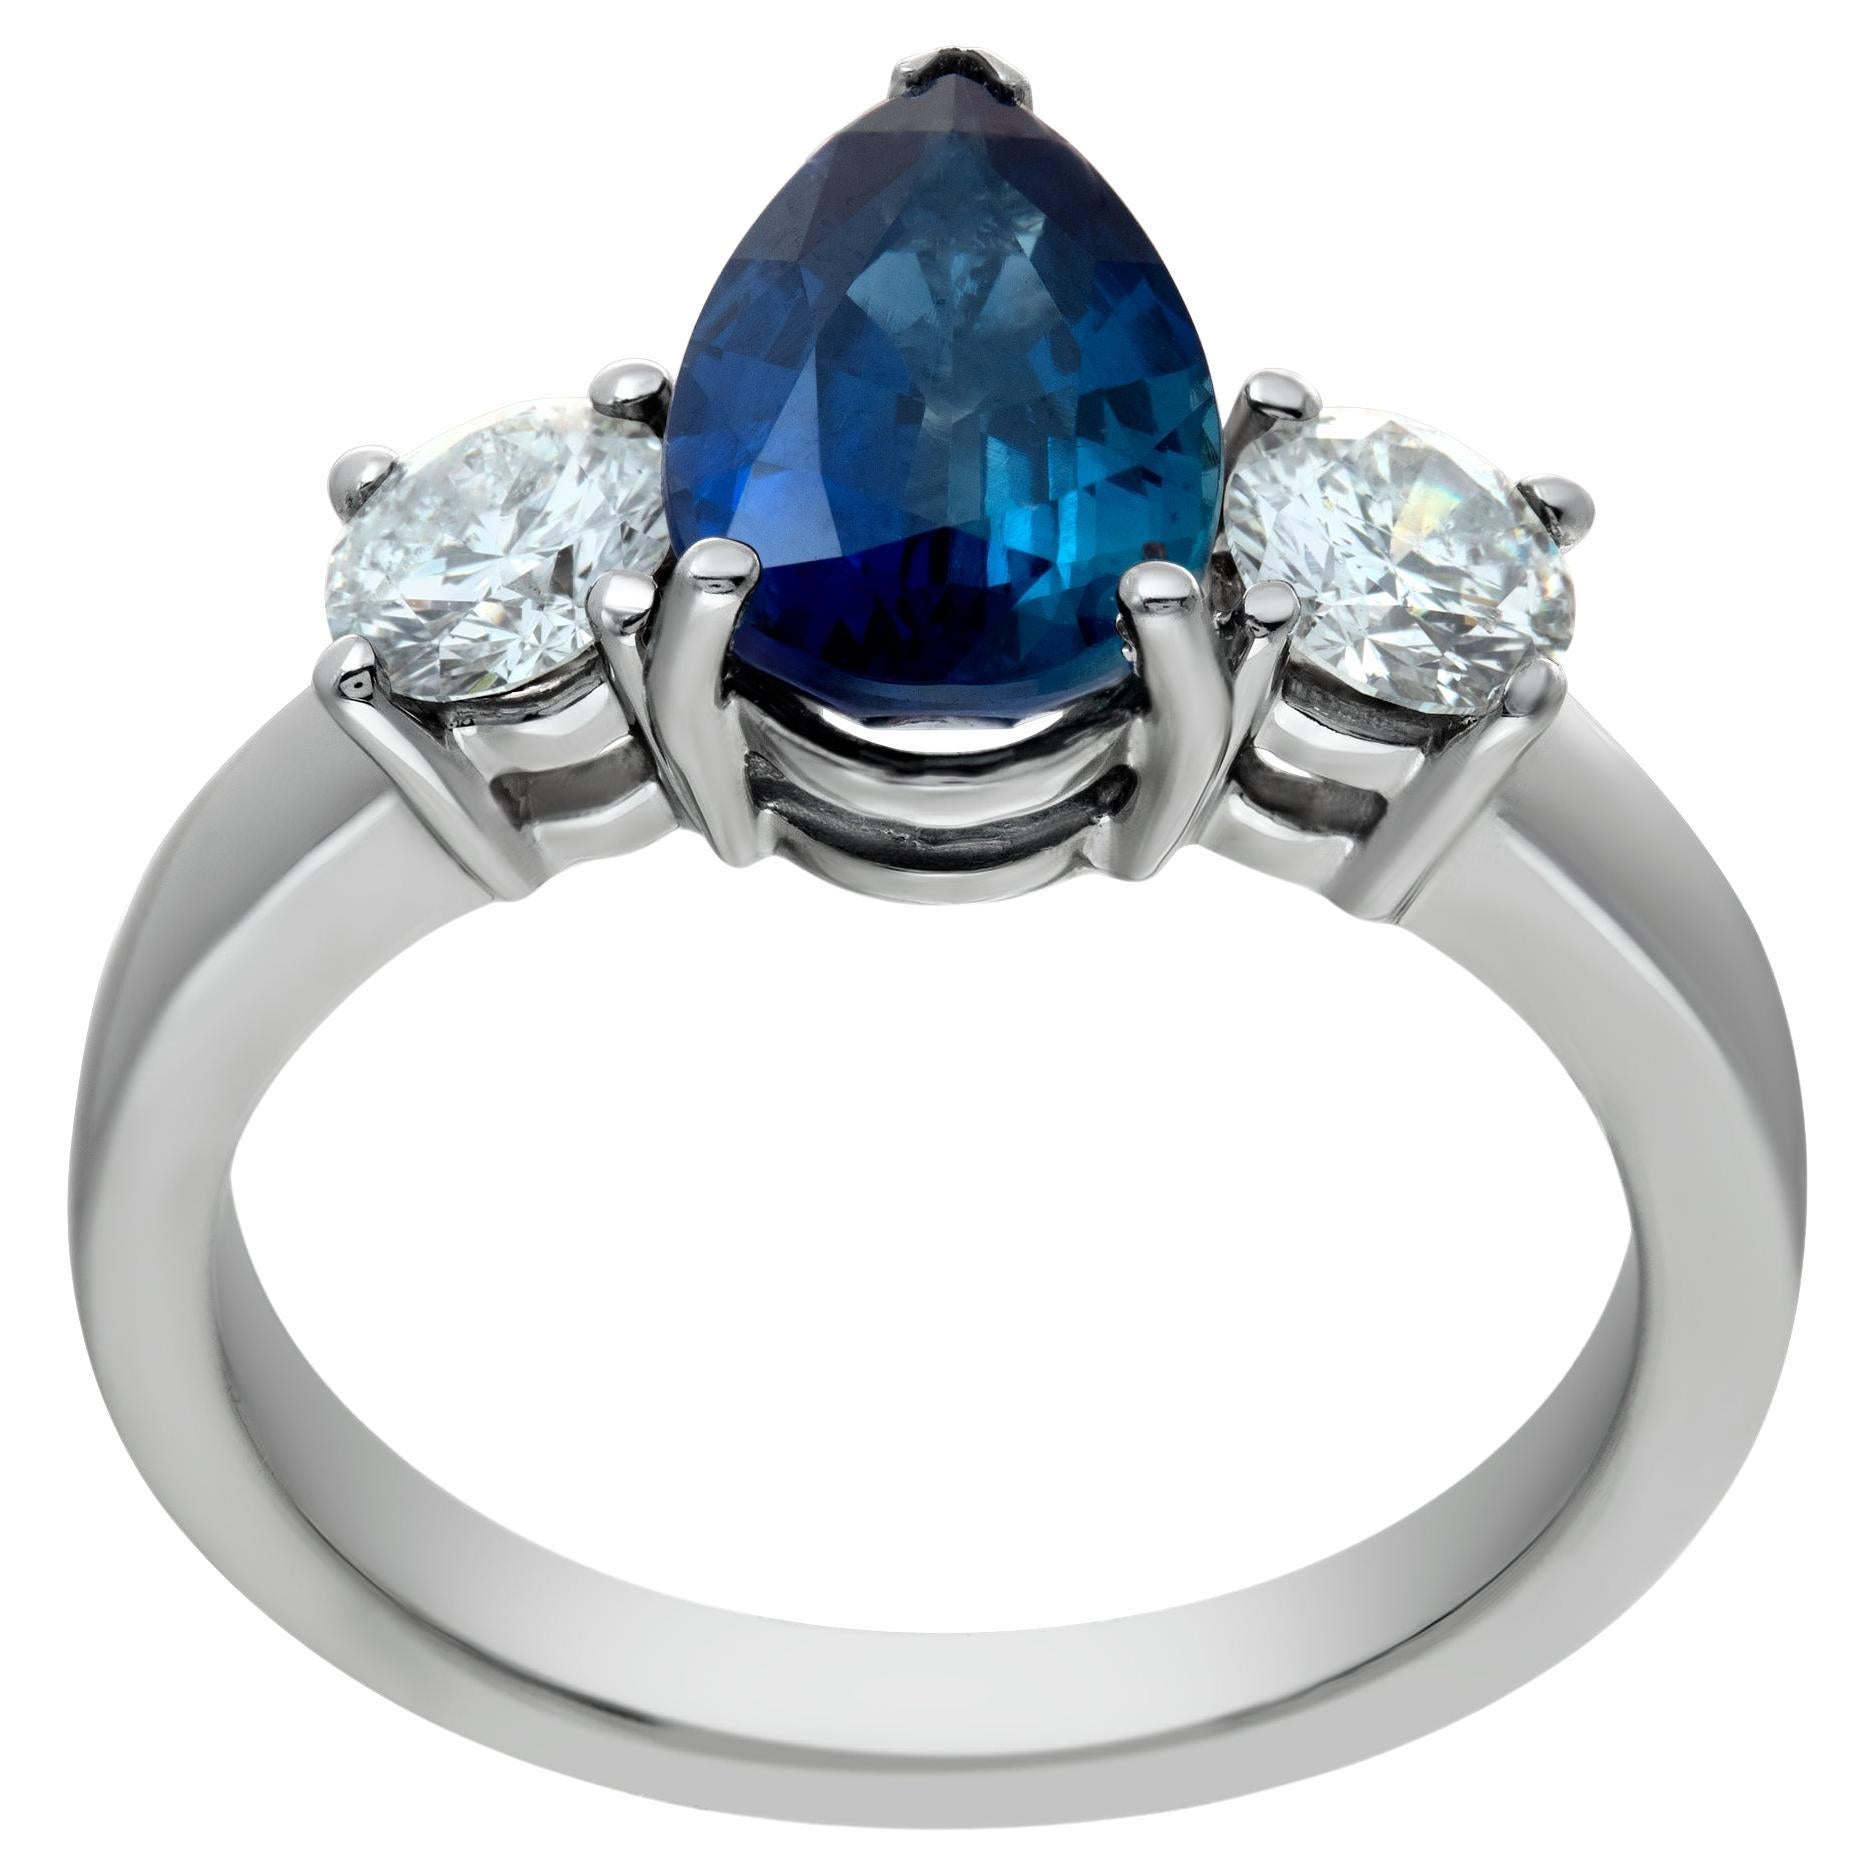 Heated Pear Shape 2.16 Carat Sapphire Ring In Platinum For Sale